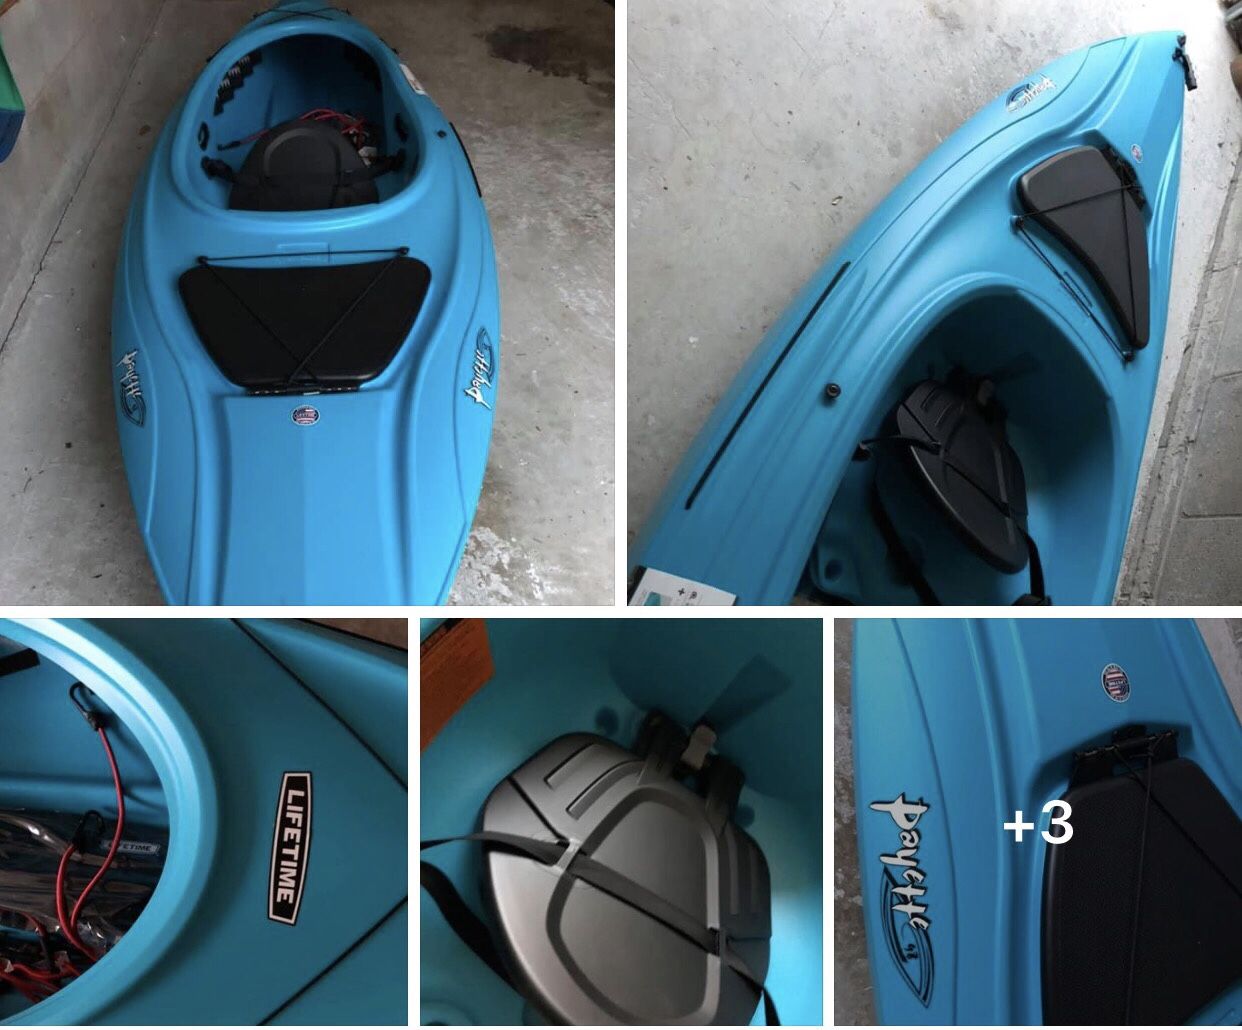 Brand NEW kayak with paddles included